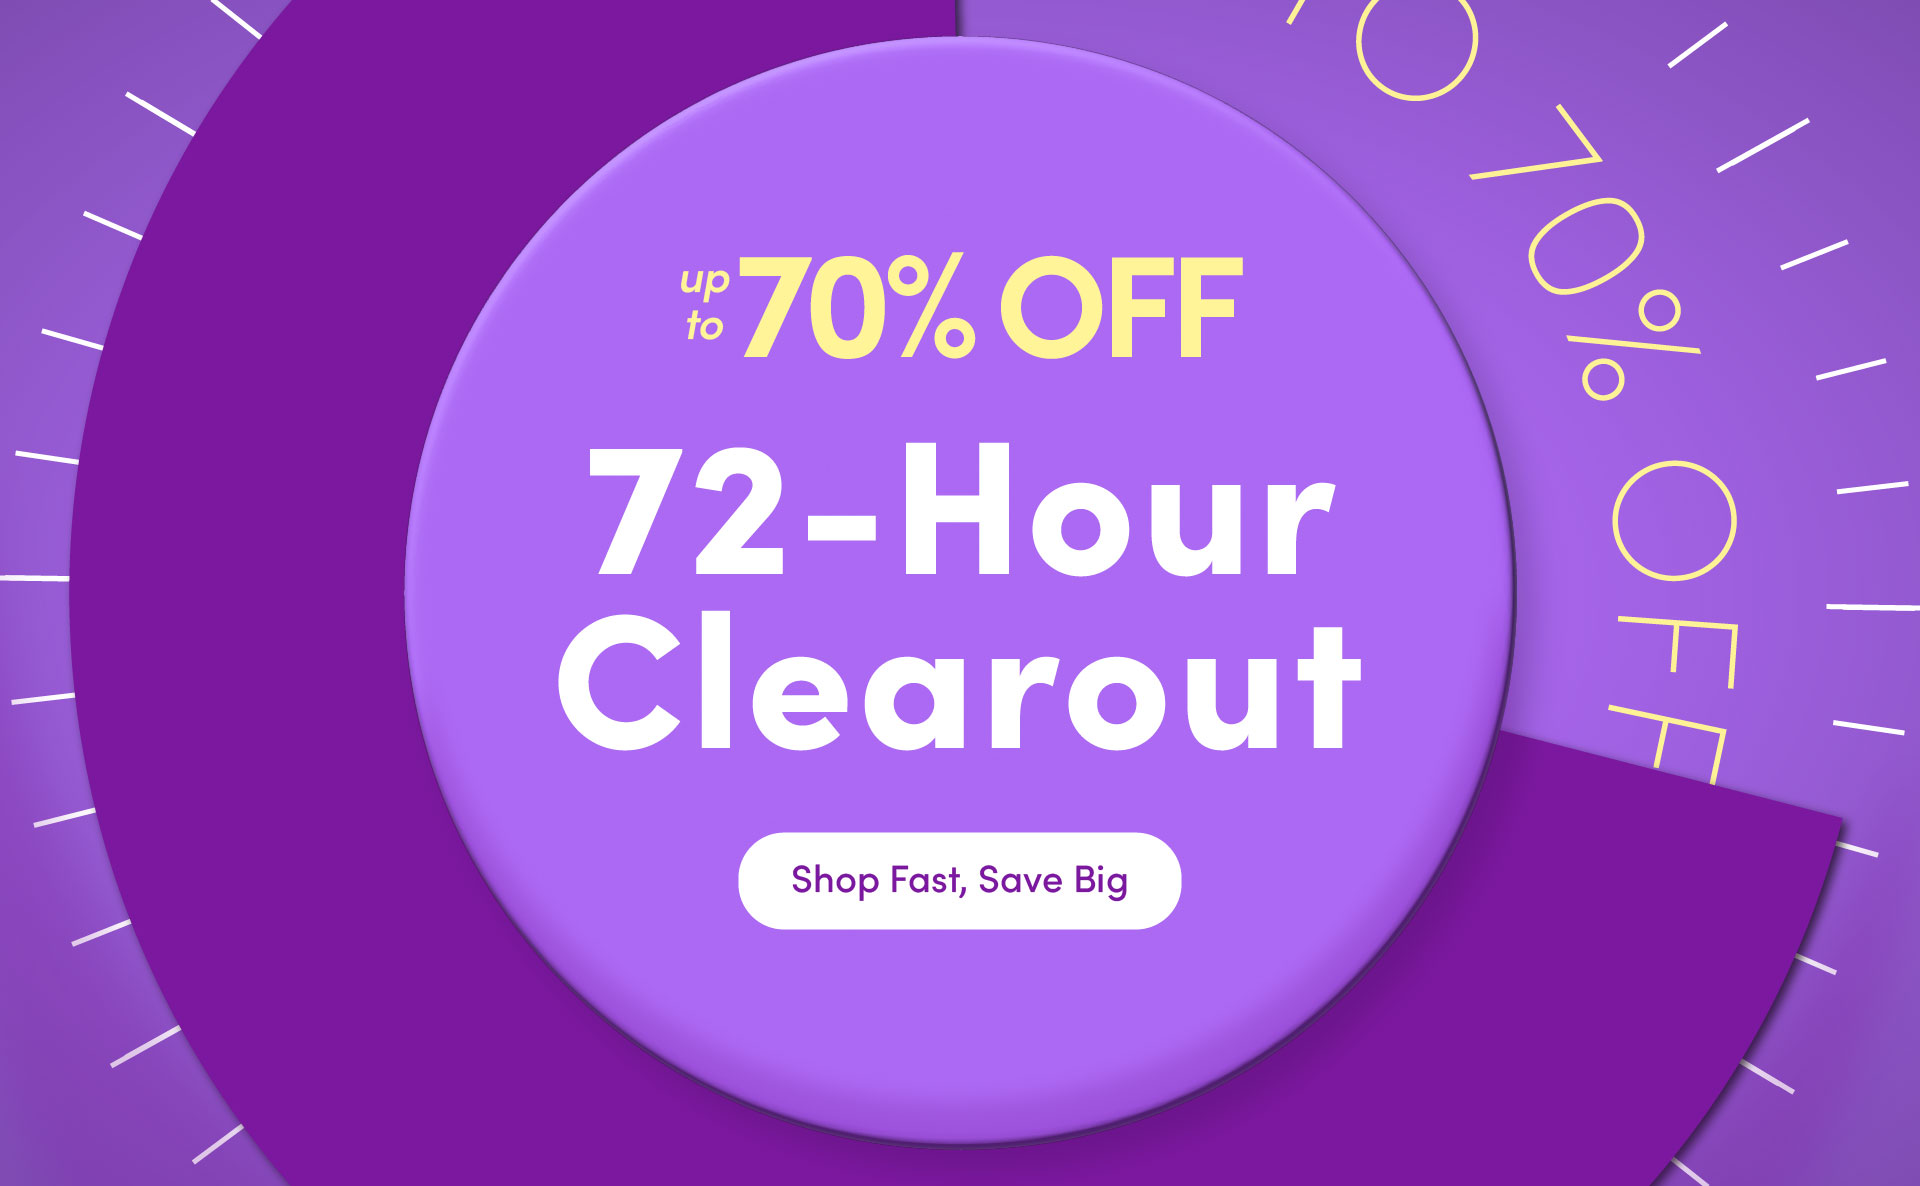 up to 70% OFF 72-Hour Clearout Shop Fast, Save Big